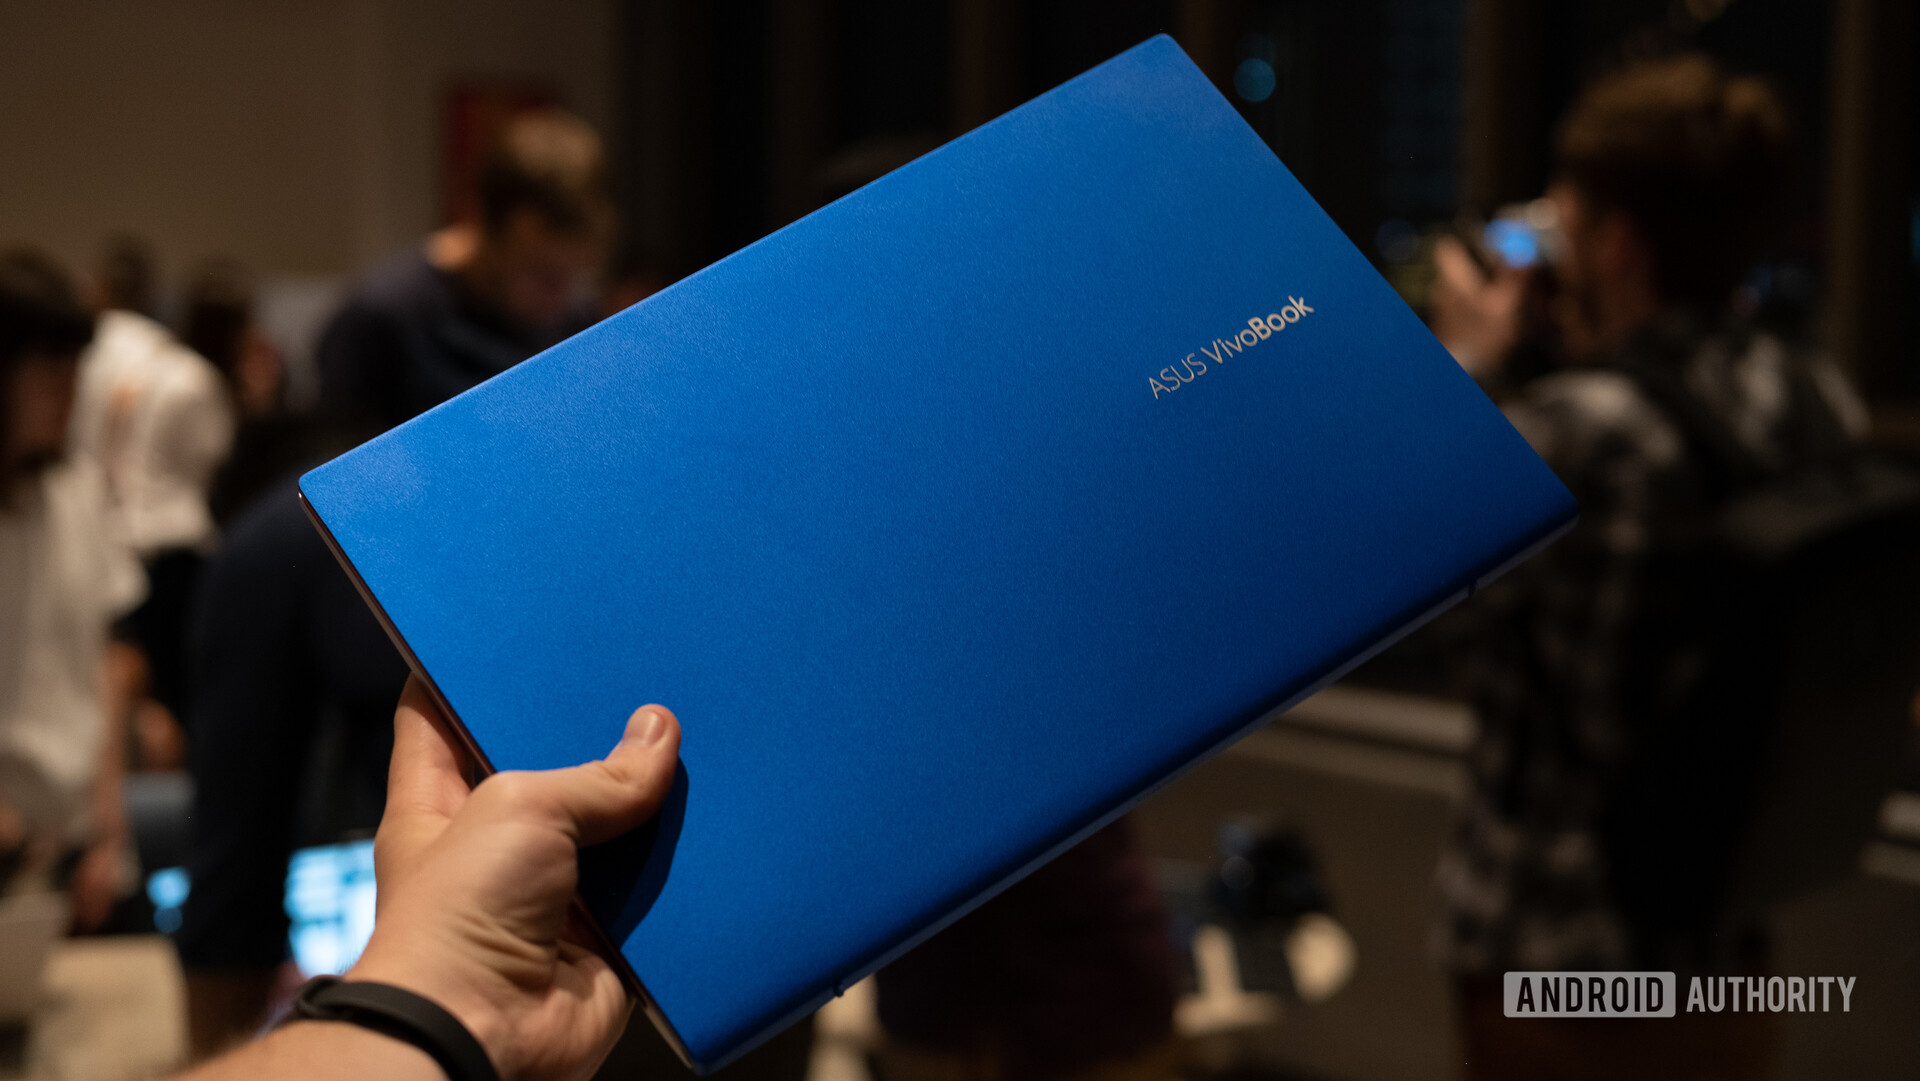 The ASUS Vivobook in hand.